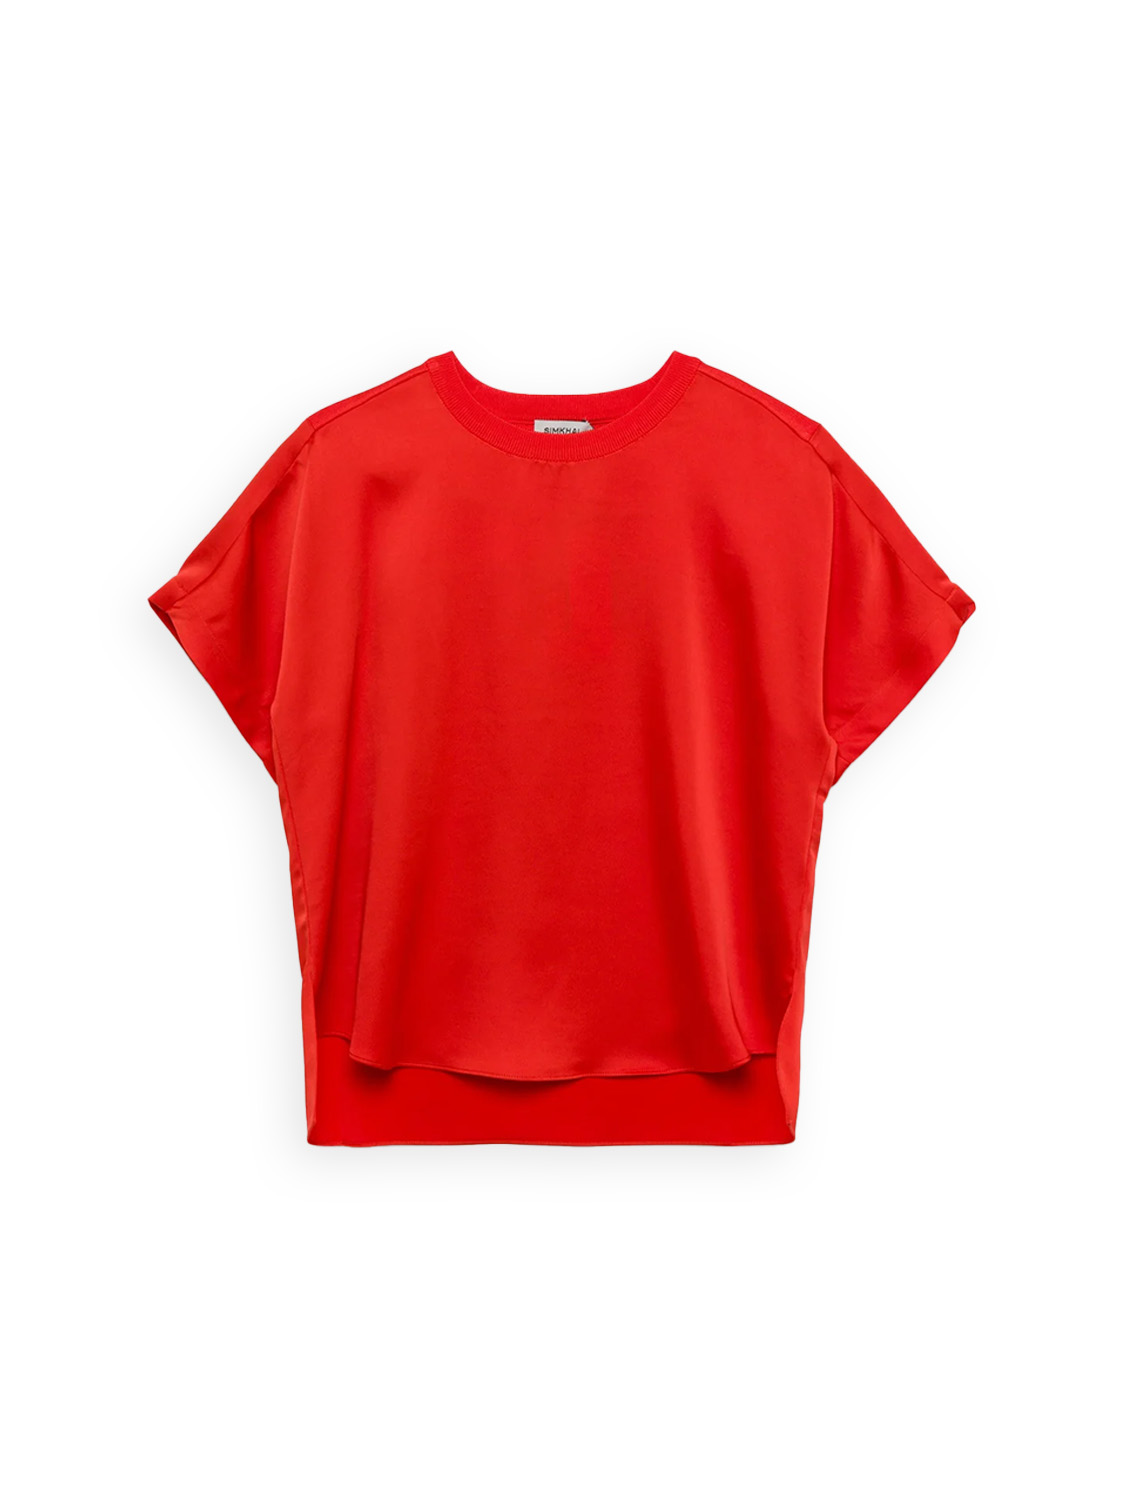 Simkhai Addy – T-Shirt with a knit back  red M